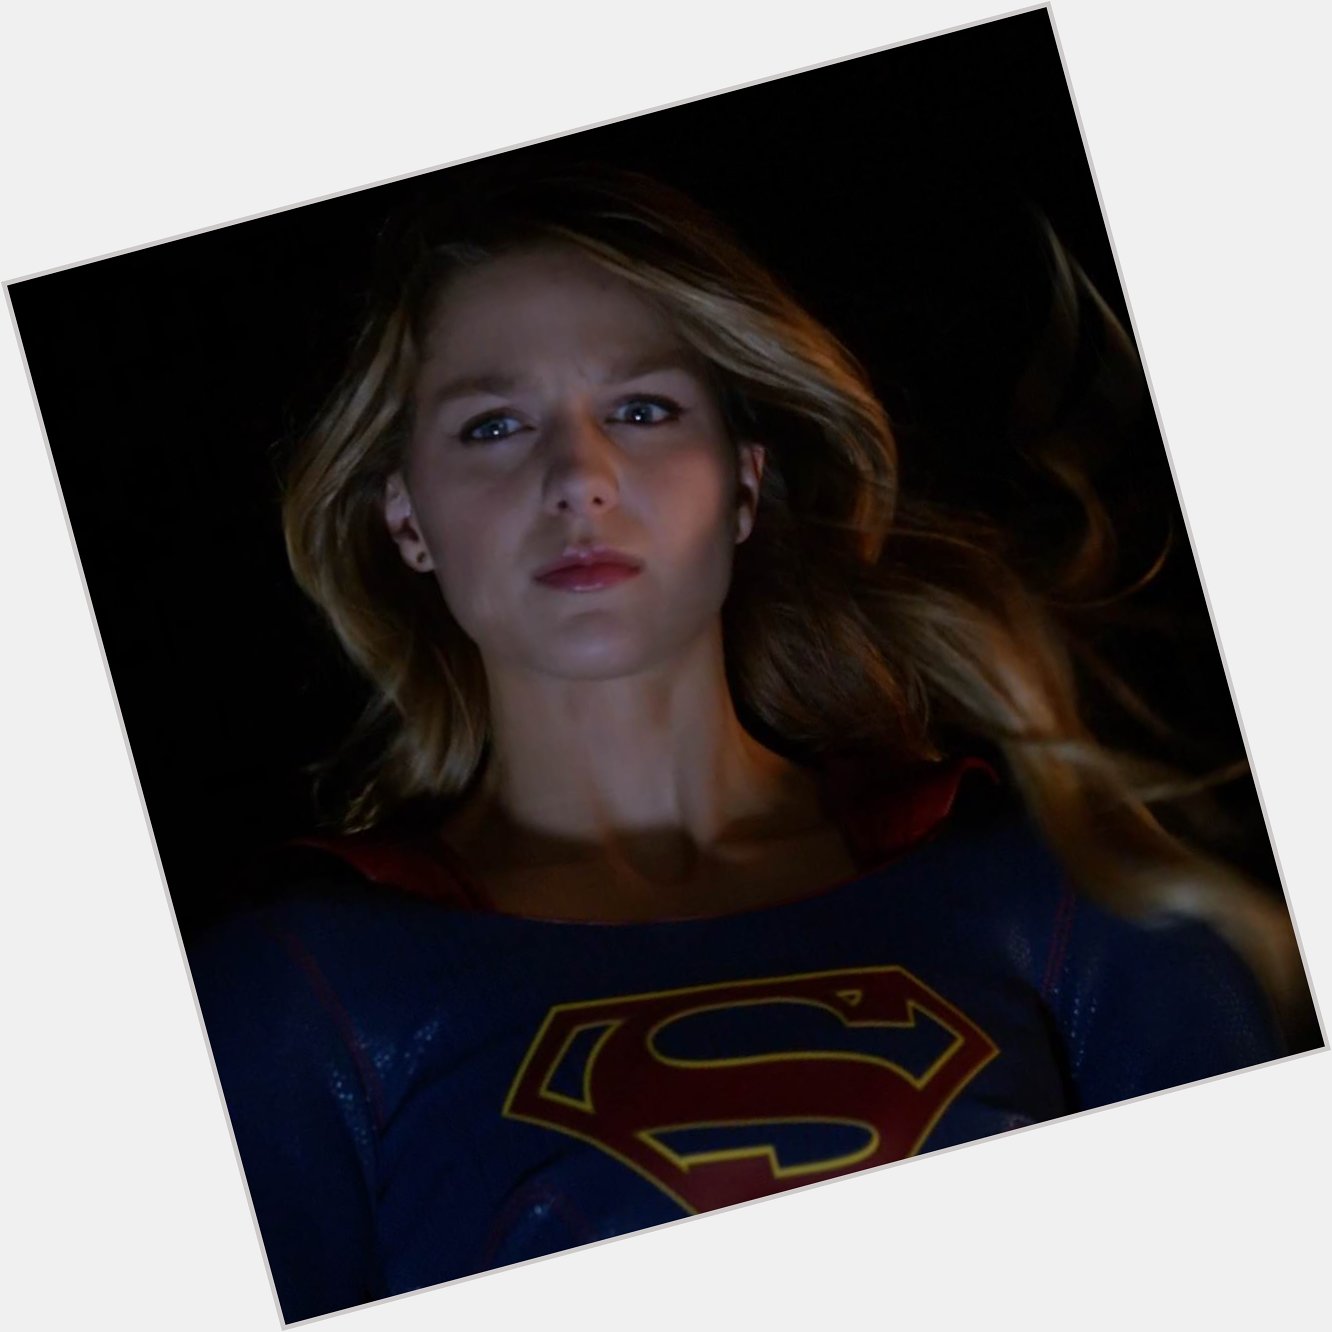 Happy birthday  to the most incredible  woman in the world !!!

HAPPY BIRTHDAY MELISSA BENOIST 